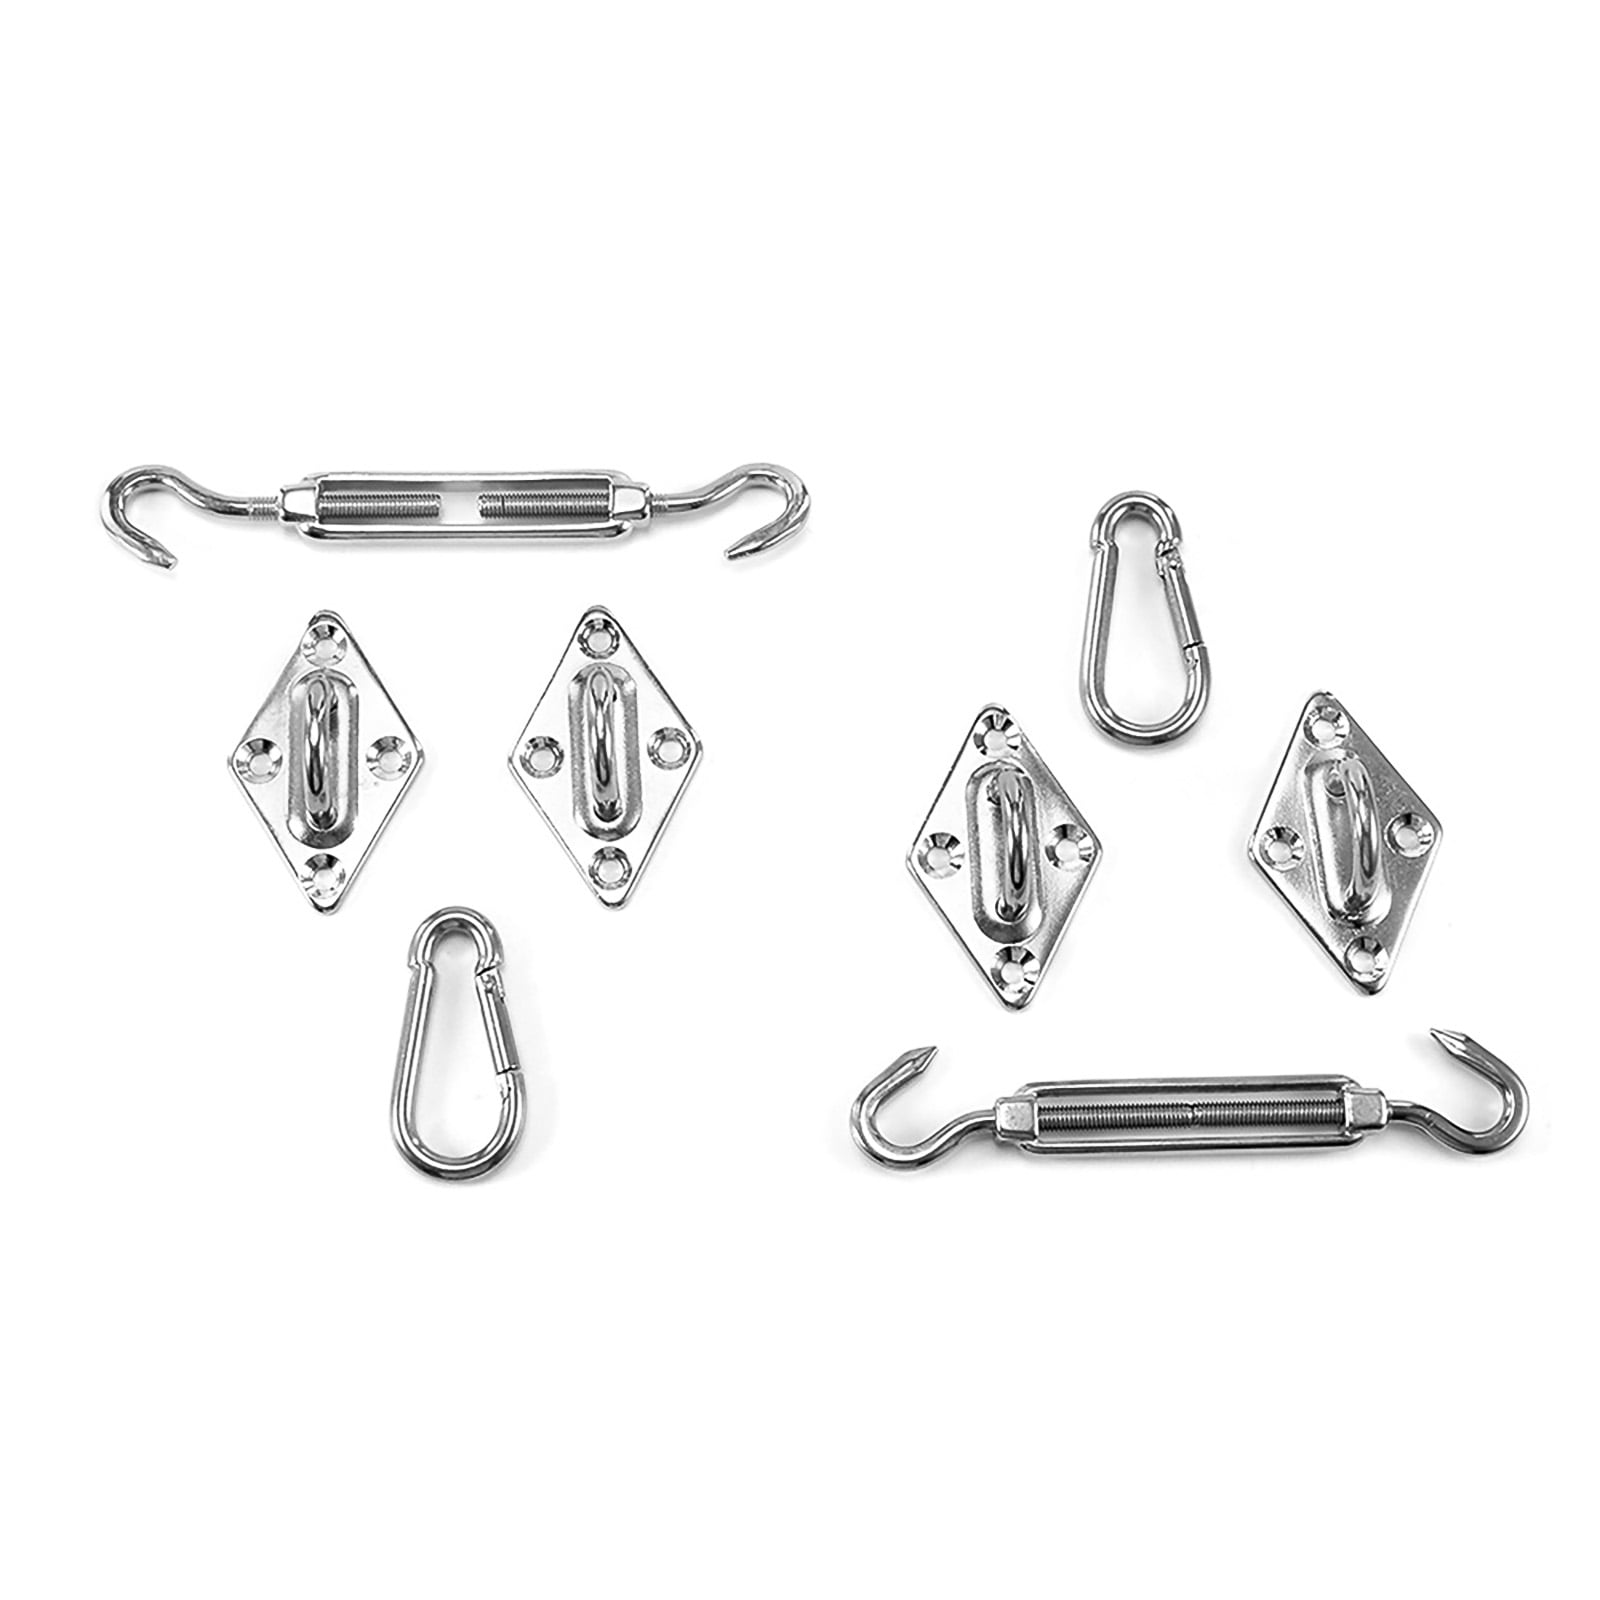 Stainless Steel Sun Sail Shade Canopy Fixing Fitting Hardware Accessory Kit 